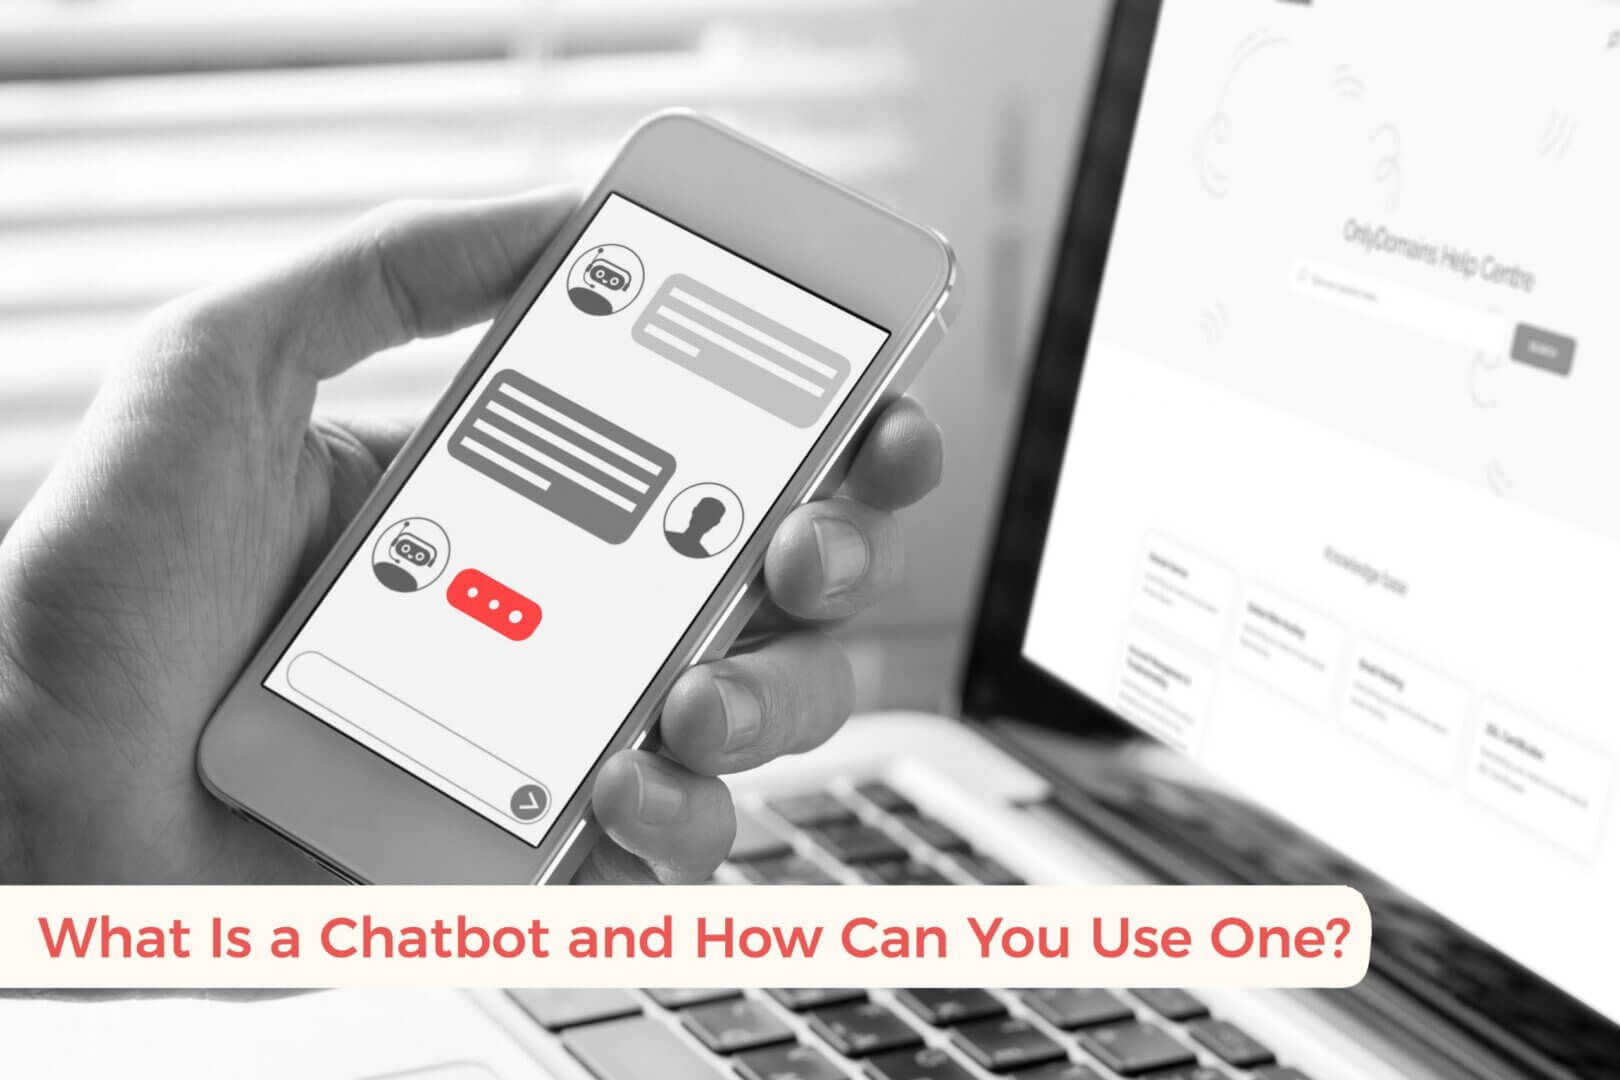 What Is a Chatbot and How Can You Use One?